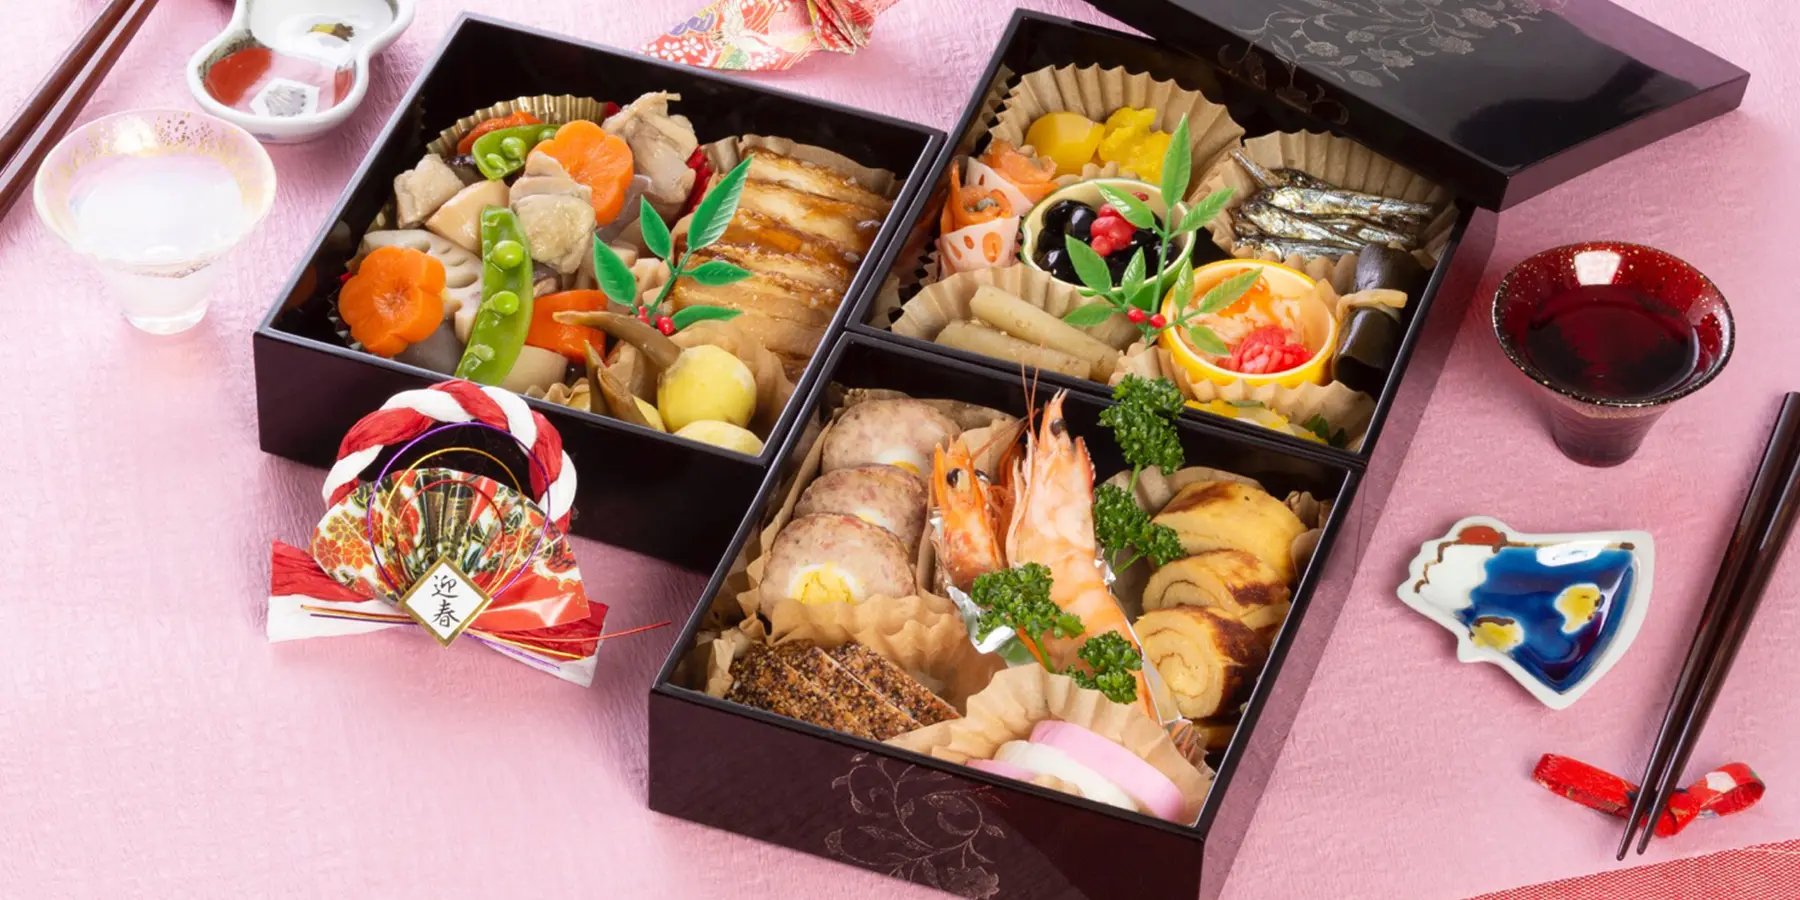 Discover our great selection of Jubako Box at Globalkitchen Japan.